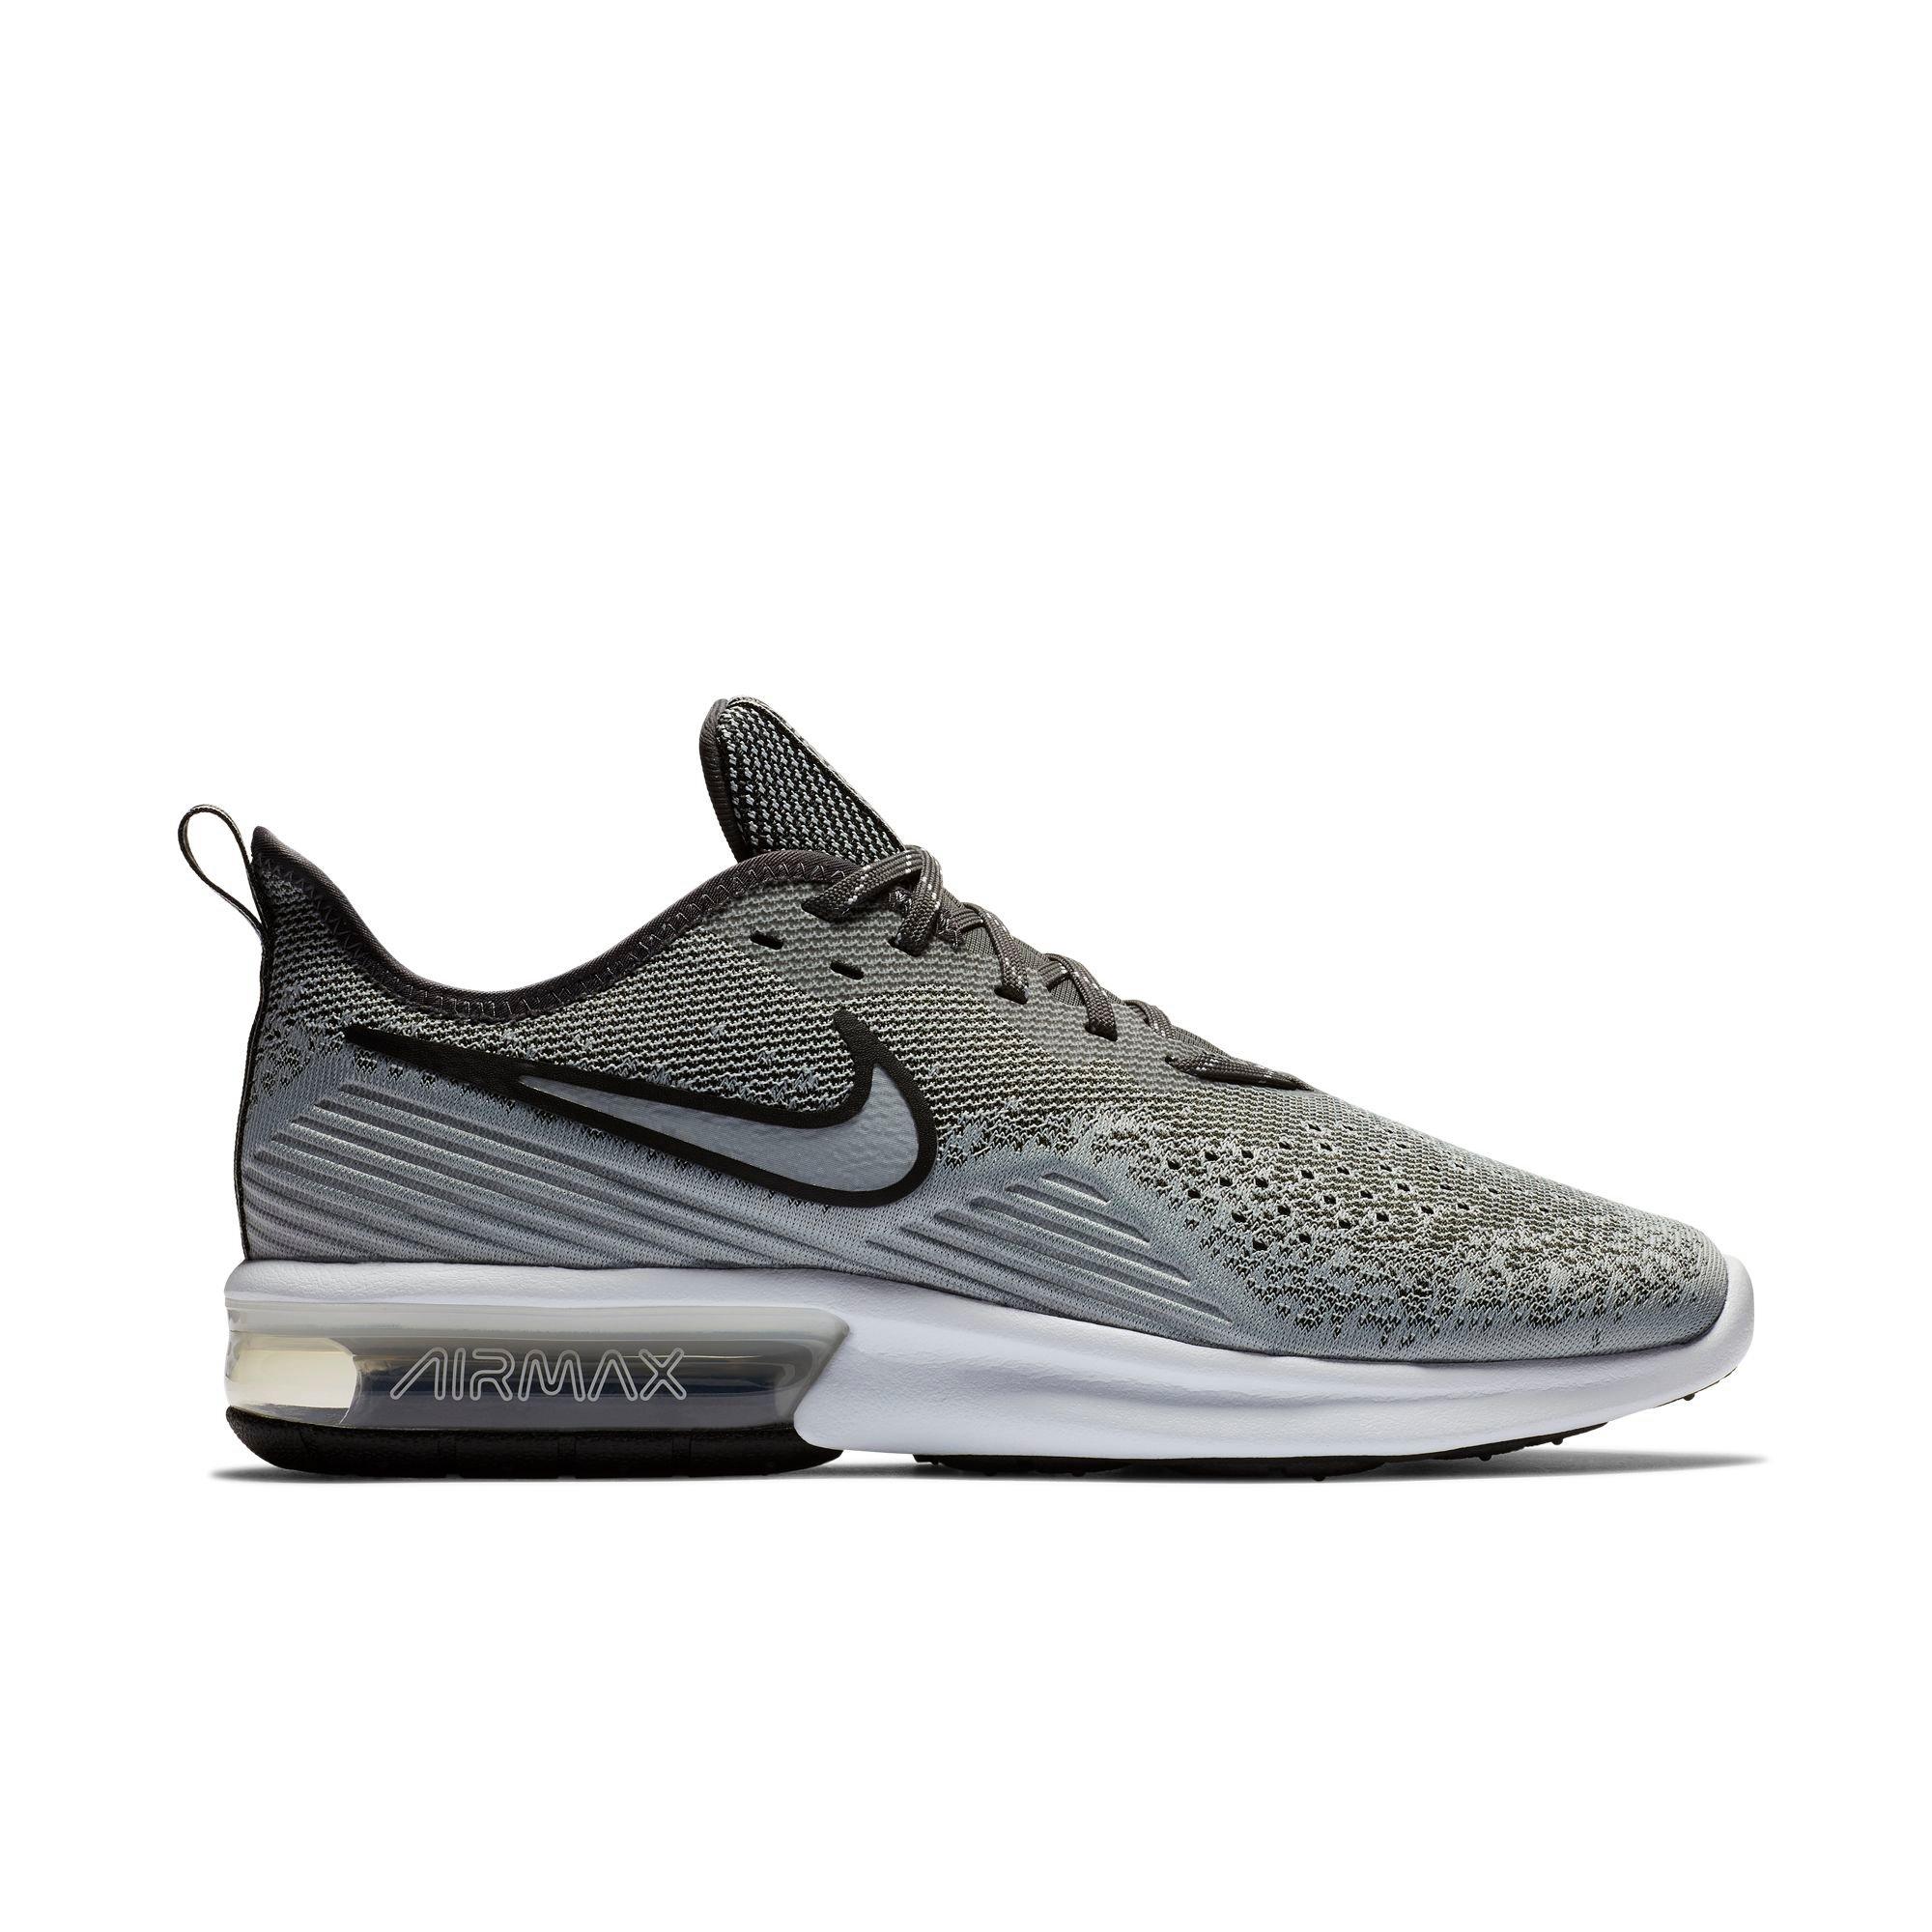 nike air max sequent 4 men's running shoe